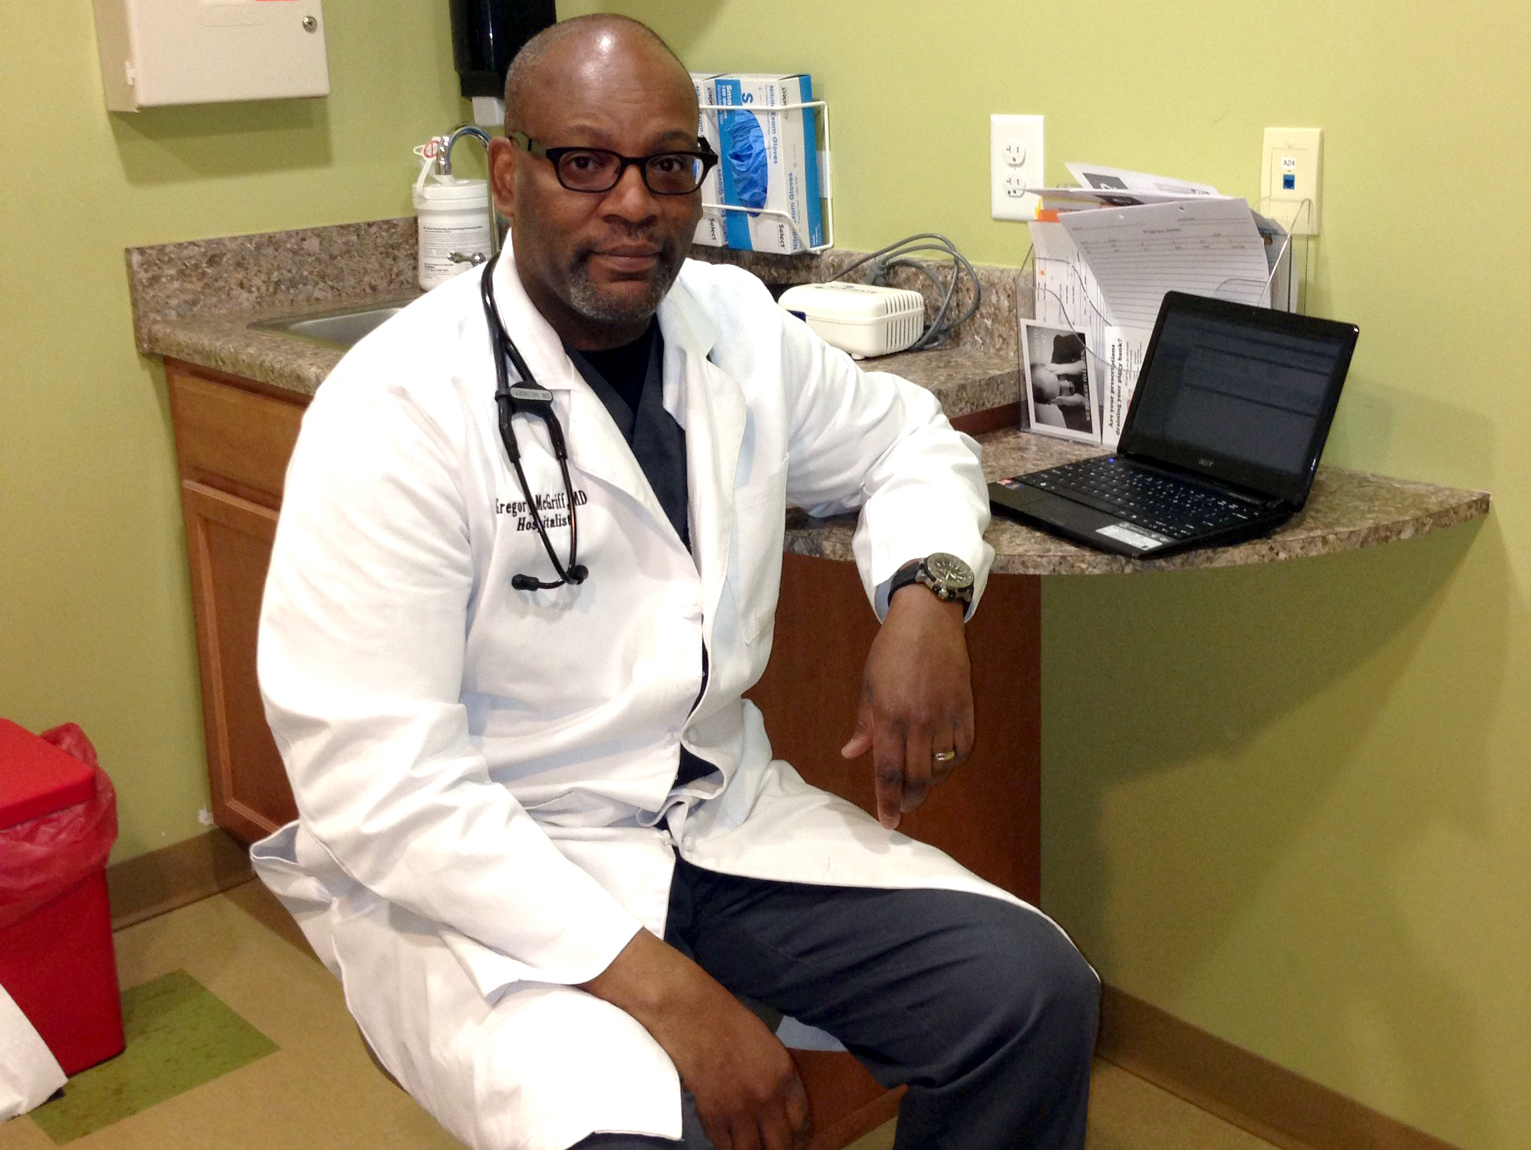 6 Troubling Facts That Prove Even Health Care Is Failing Young Black Men